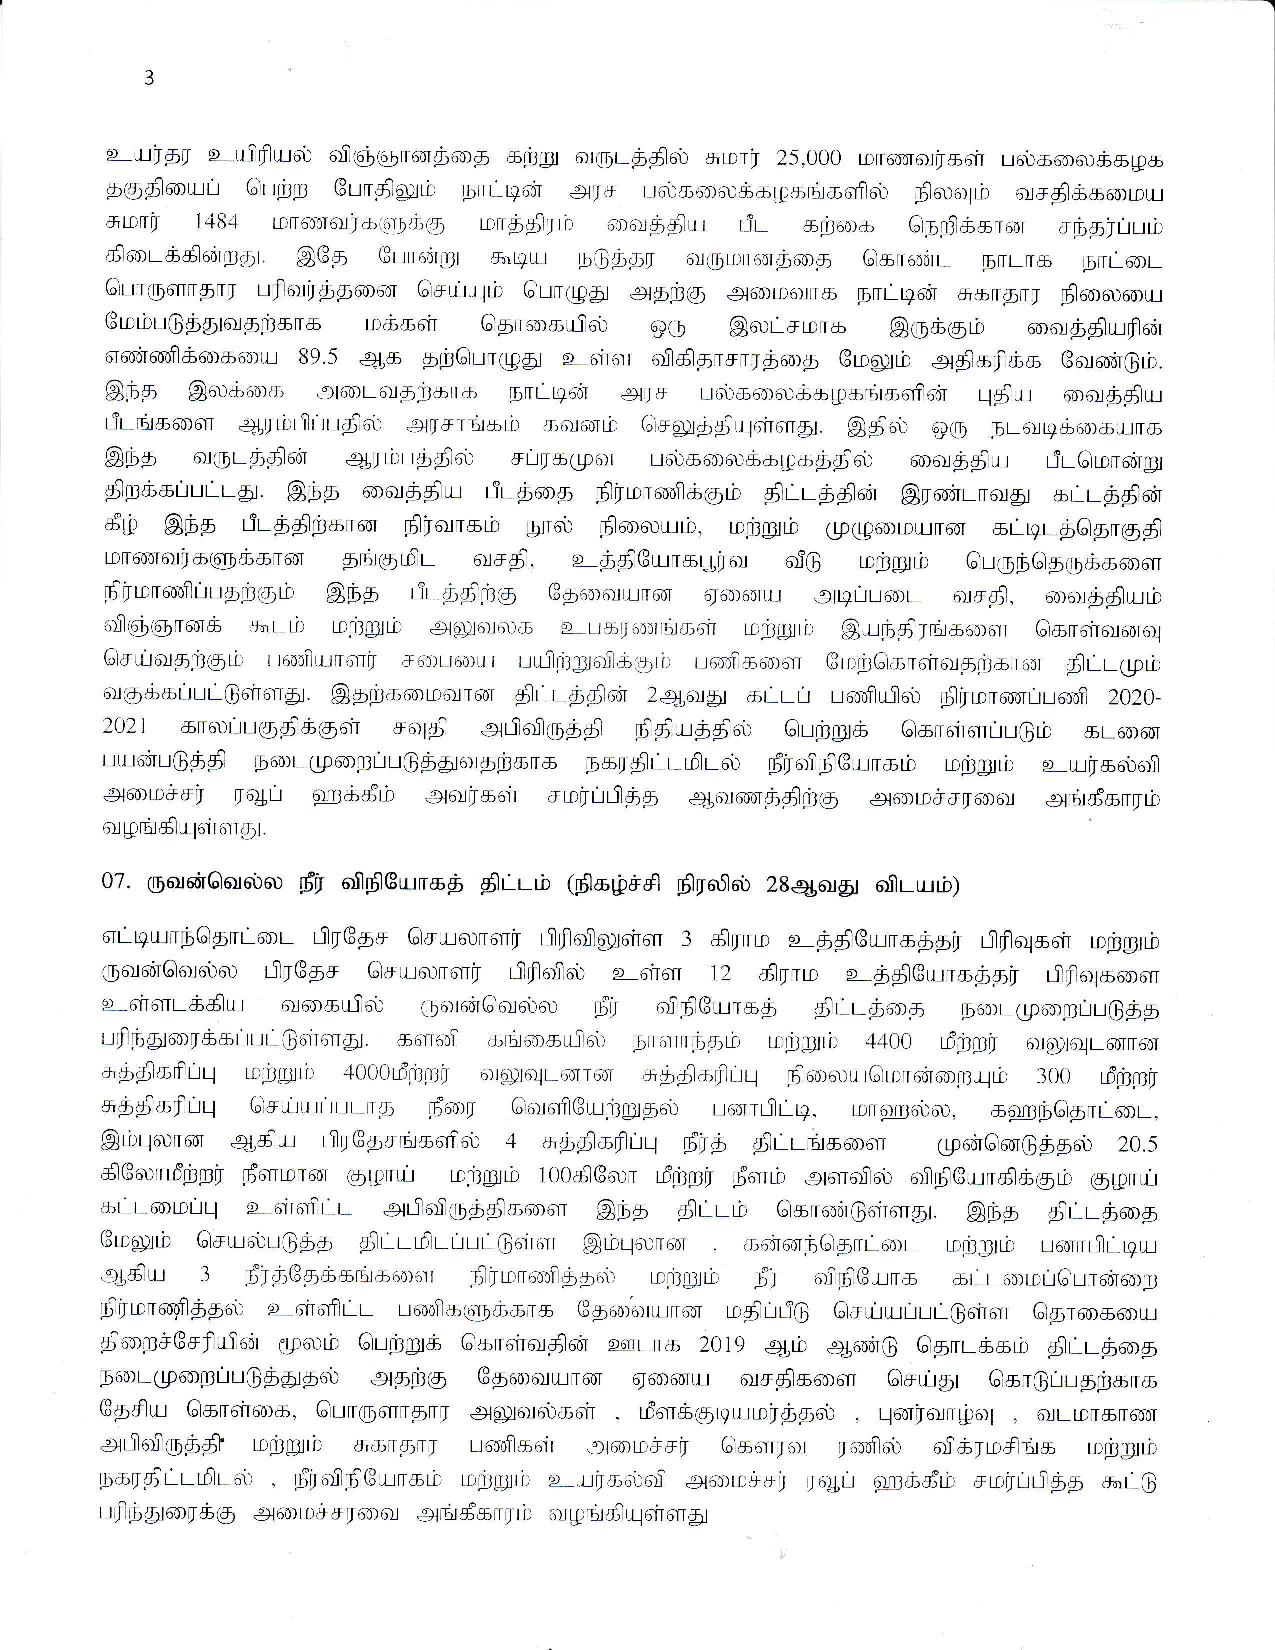 Cabinet Decision on 21.05.2019 Tamil page 004